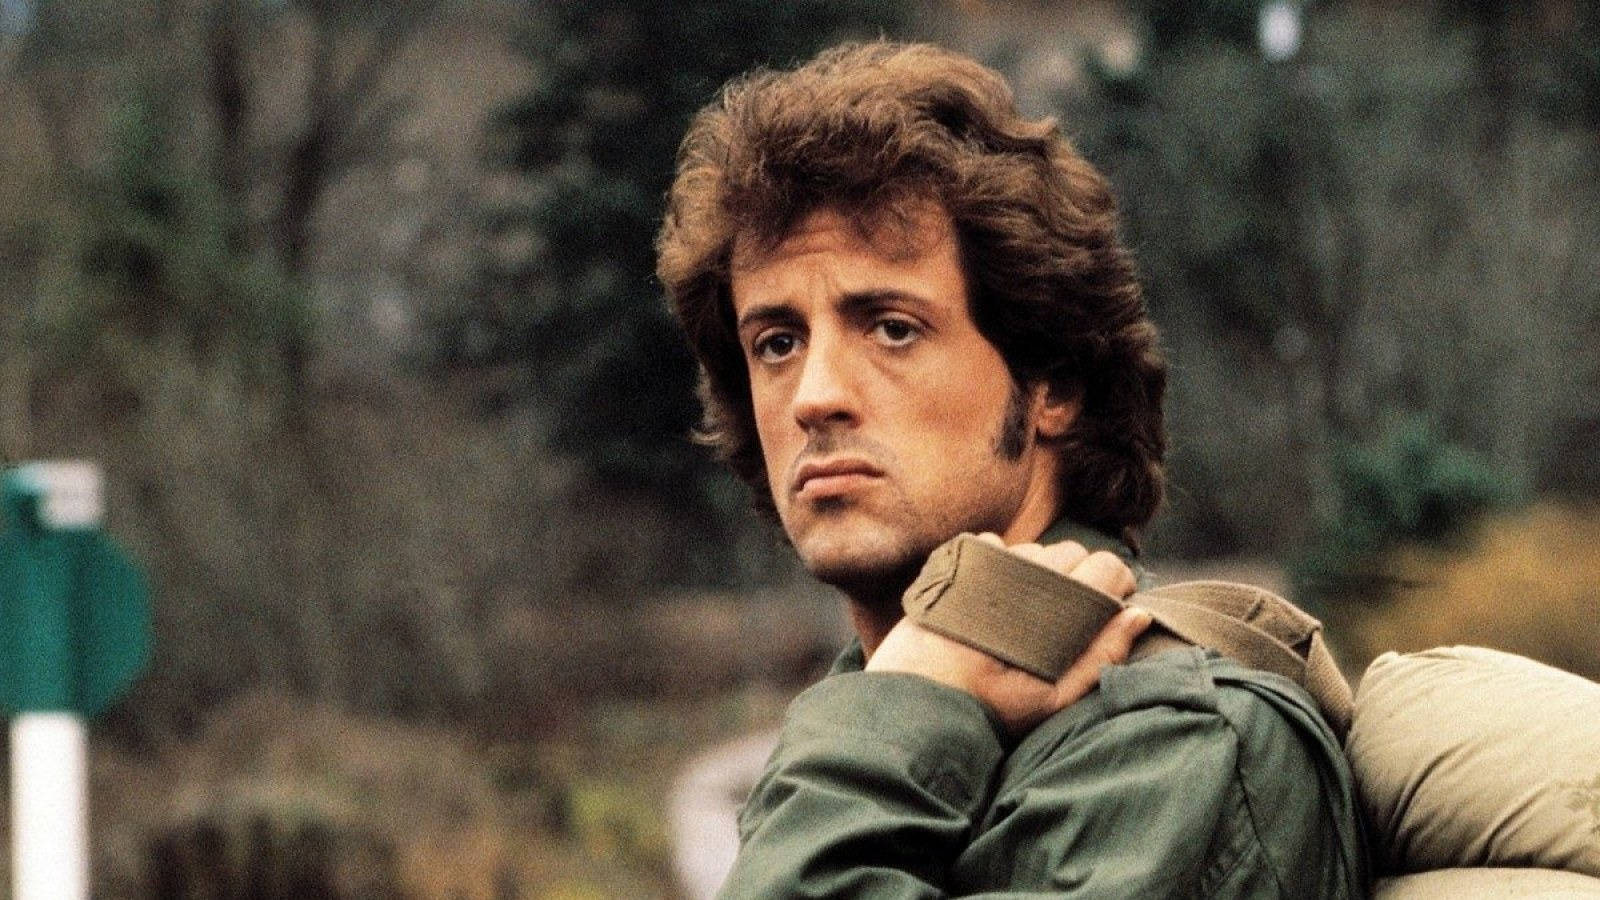 Pioneering Action Hero, Sylvester Stallone in "First Blood" Wallpaper